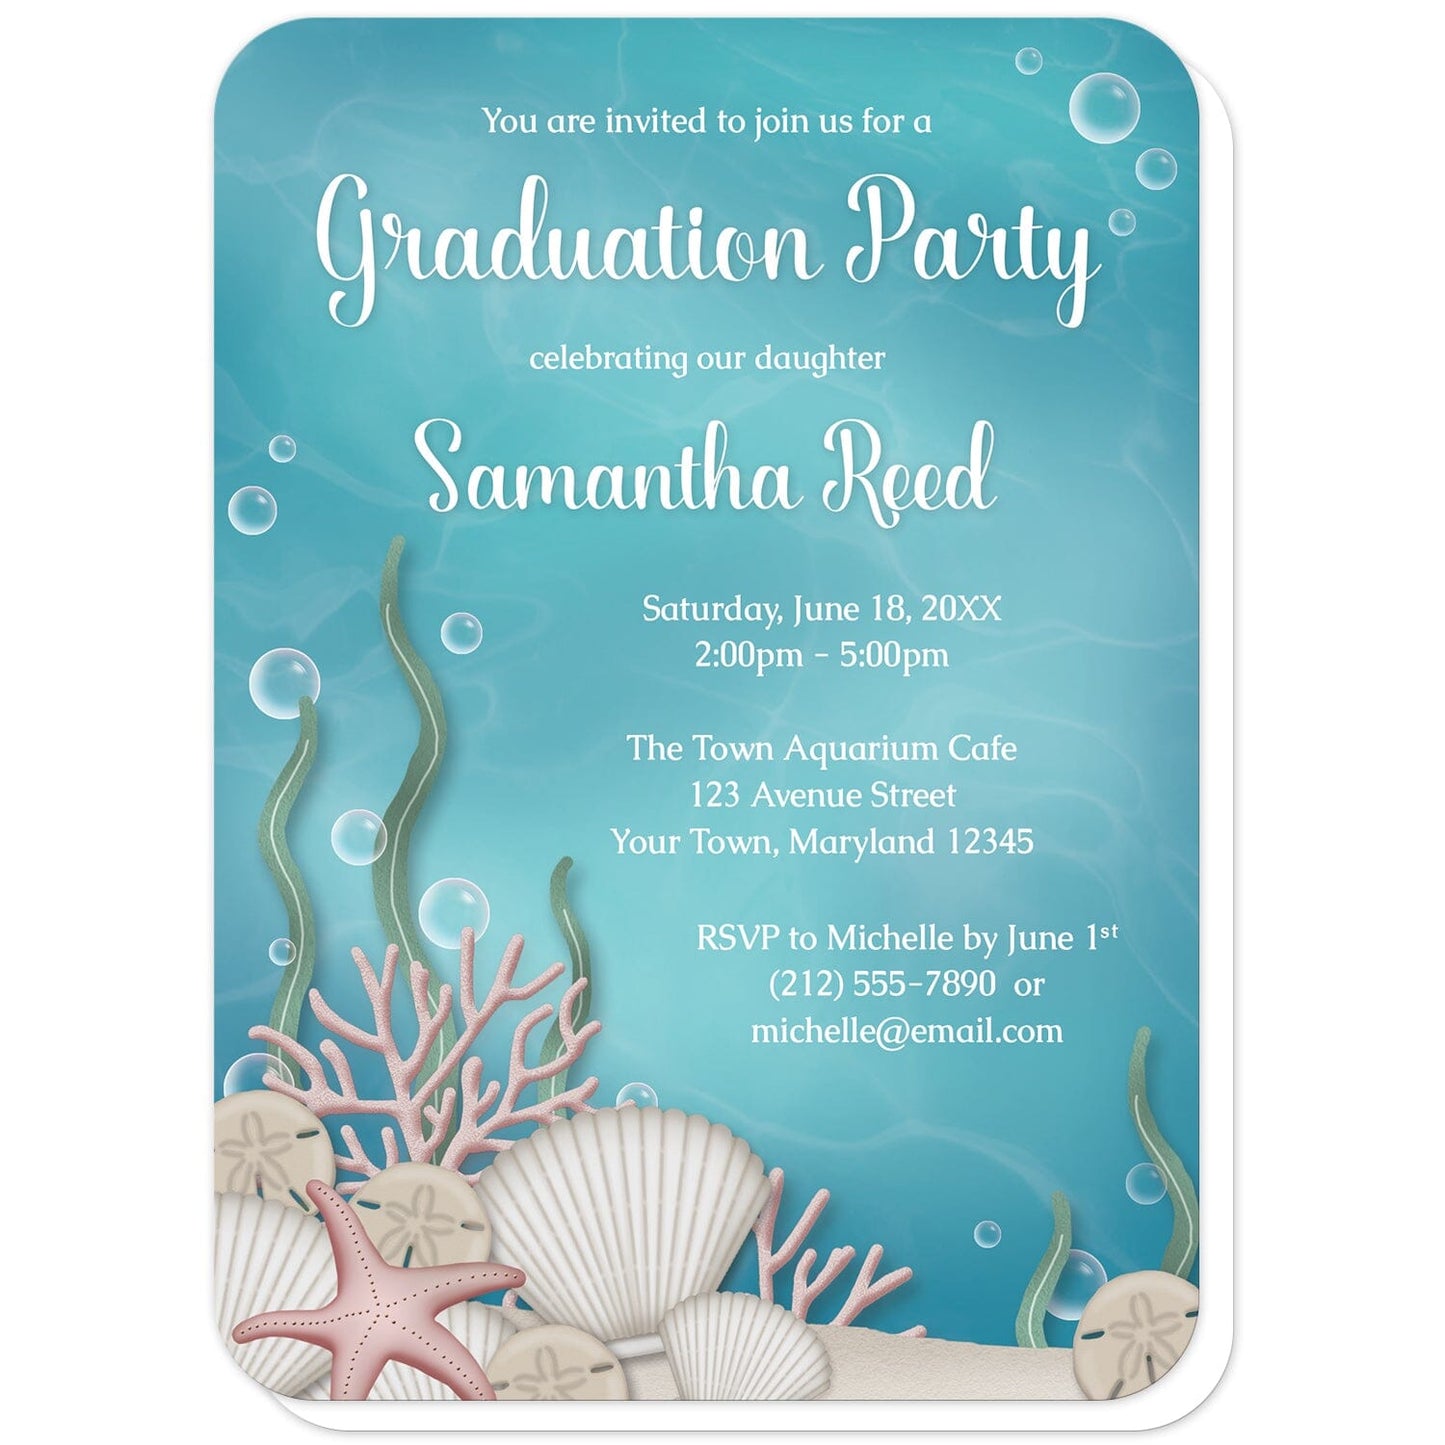 Whimsical Under the Sea Graduation Invitations (with rounded corners) at Artistically Invited. Uniquely illustrated whimsical under the sea graduation party invitations with an under the sea or aquarium theme. They are designed with a sandy seabed, assorted seashells, coral, kelp, and whimsical bubbles. Your personalized graduation party details are custom printed in white over the aqua blue underwater background.